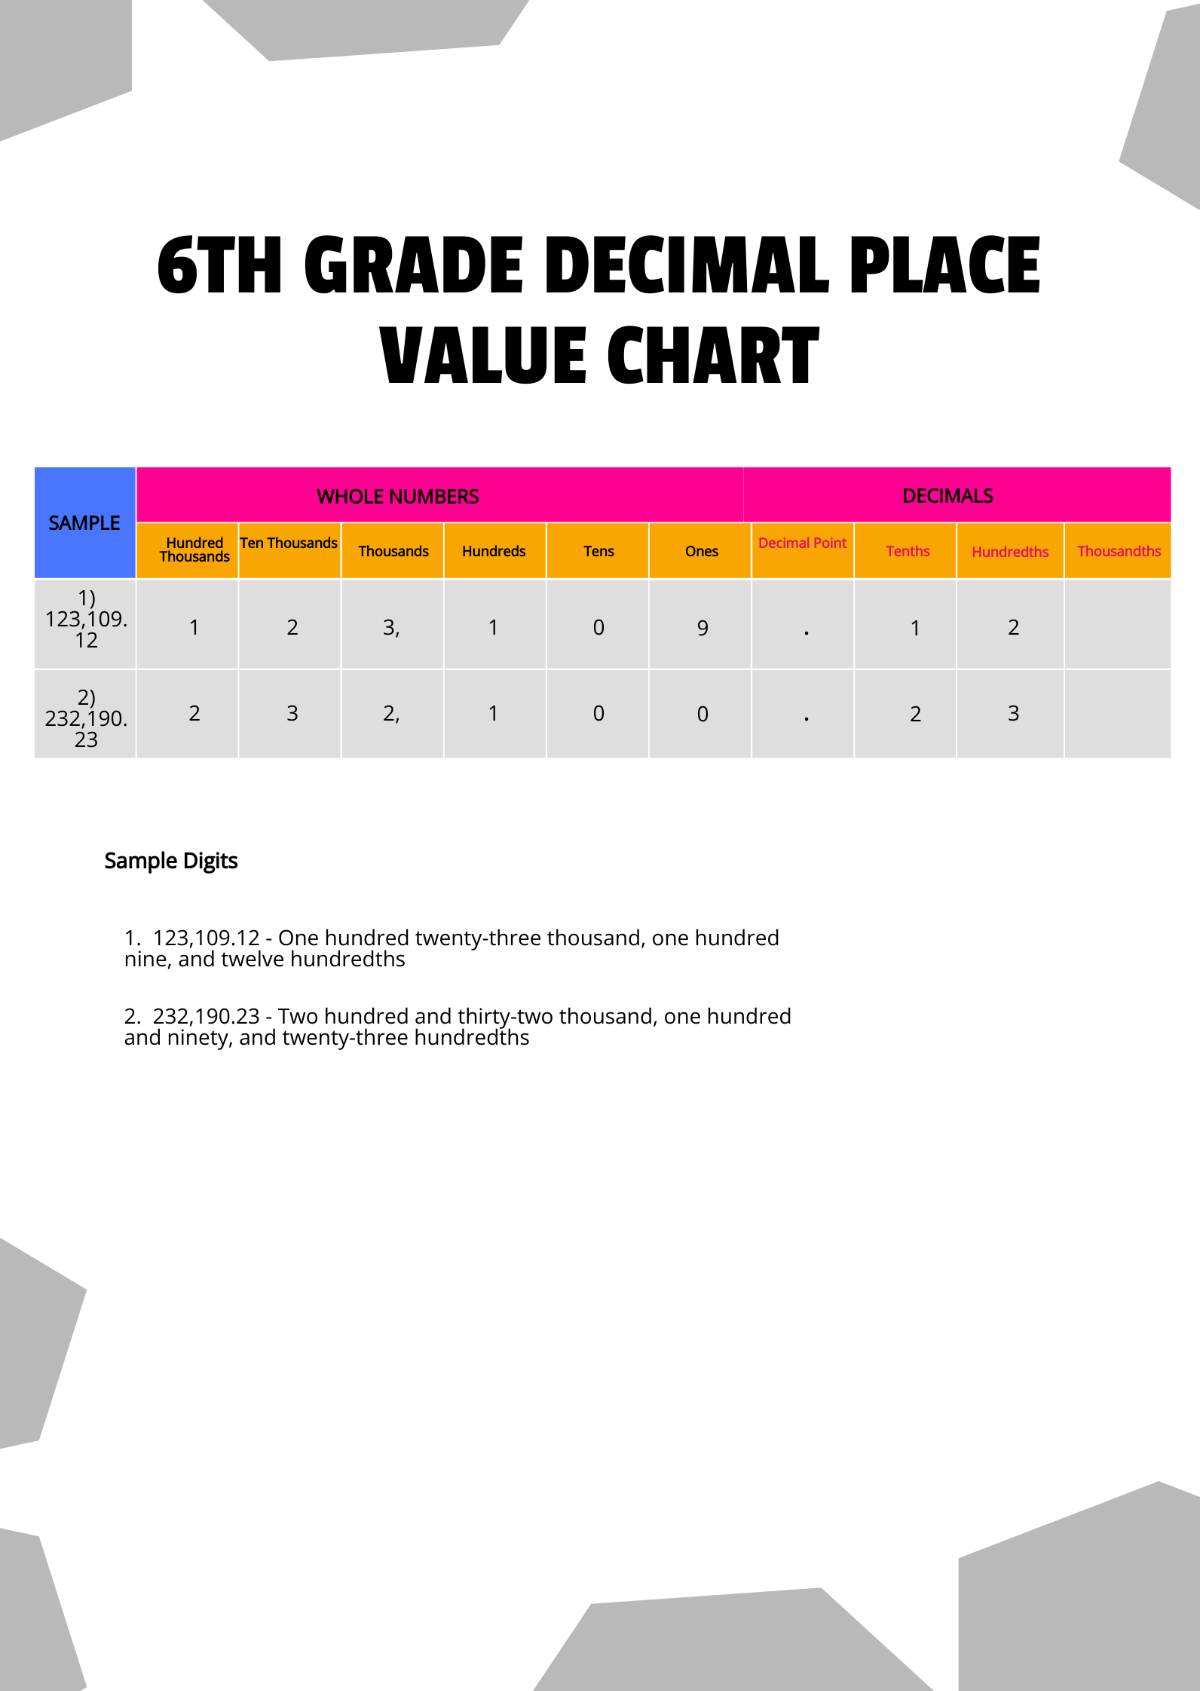 6th Grade Decimal Place Value Chart Template